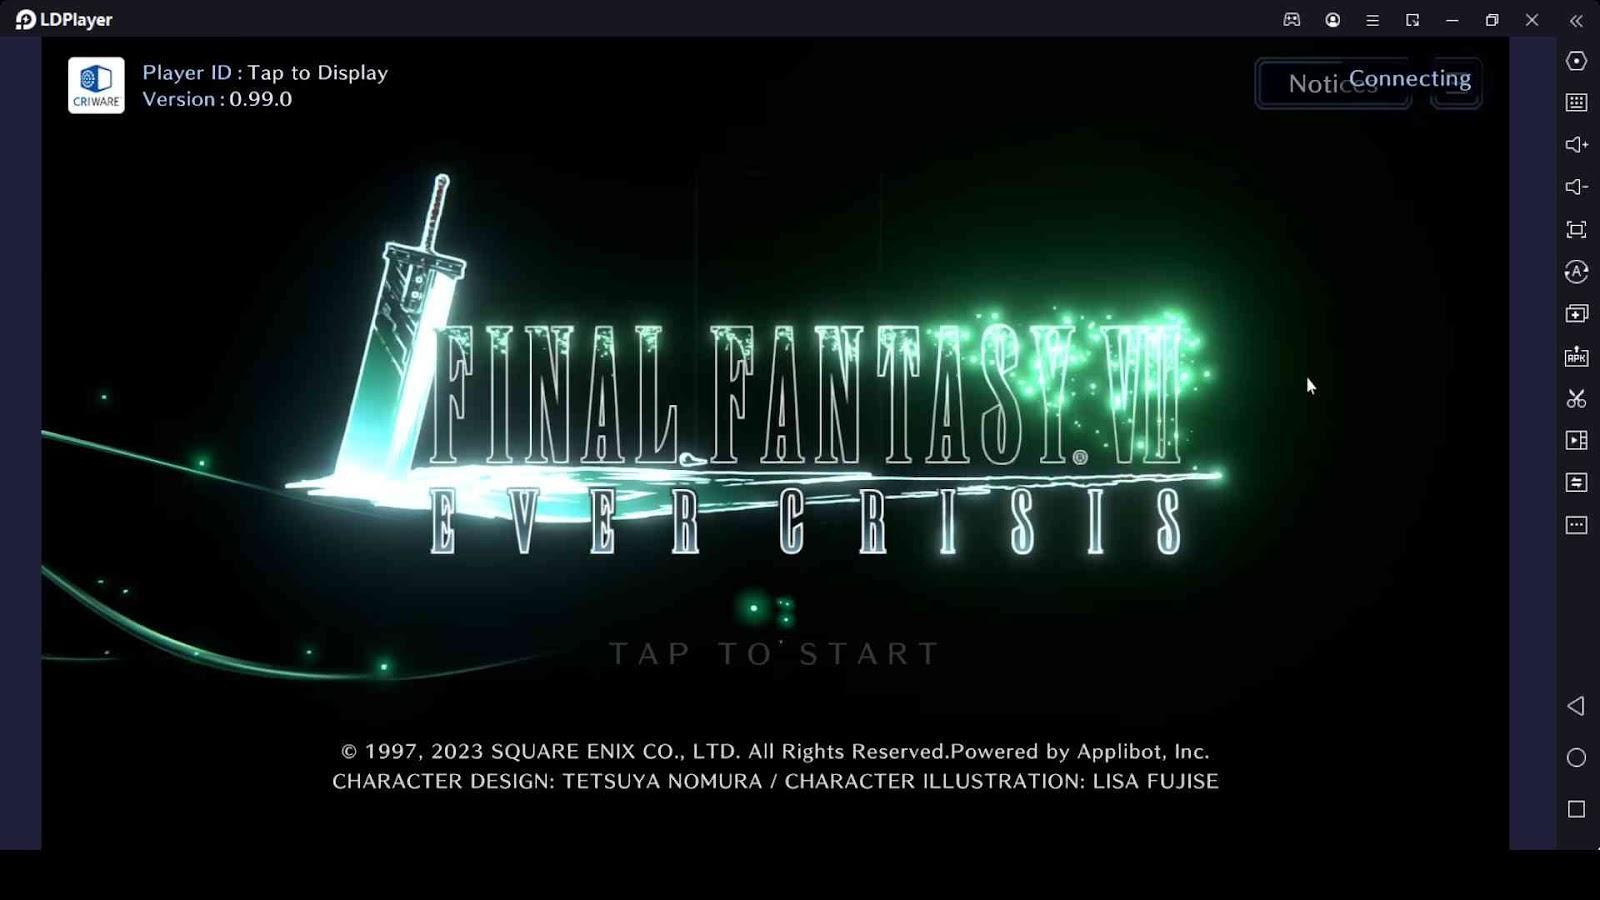 Final Fantasy 7 Ever Crisis PC Guide: How to Play it On PC